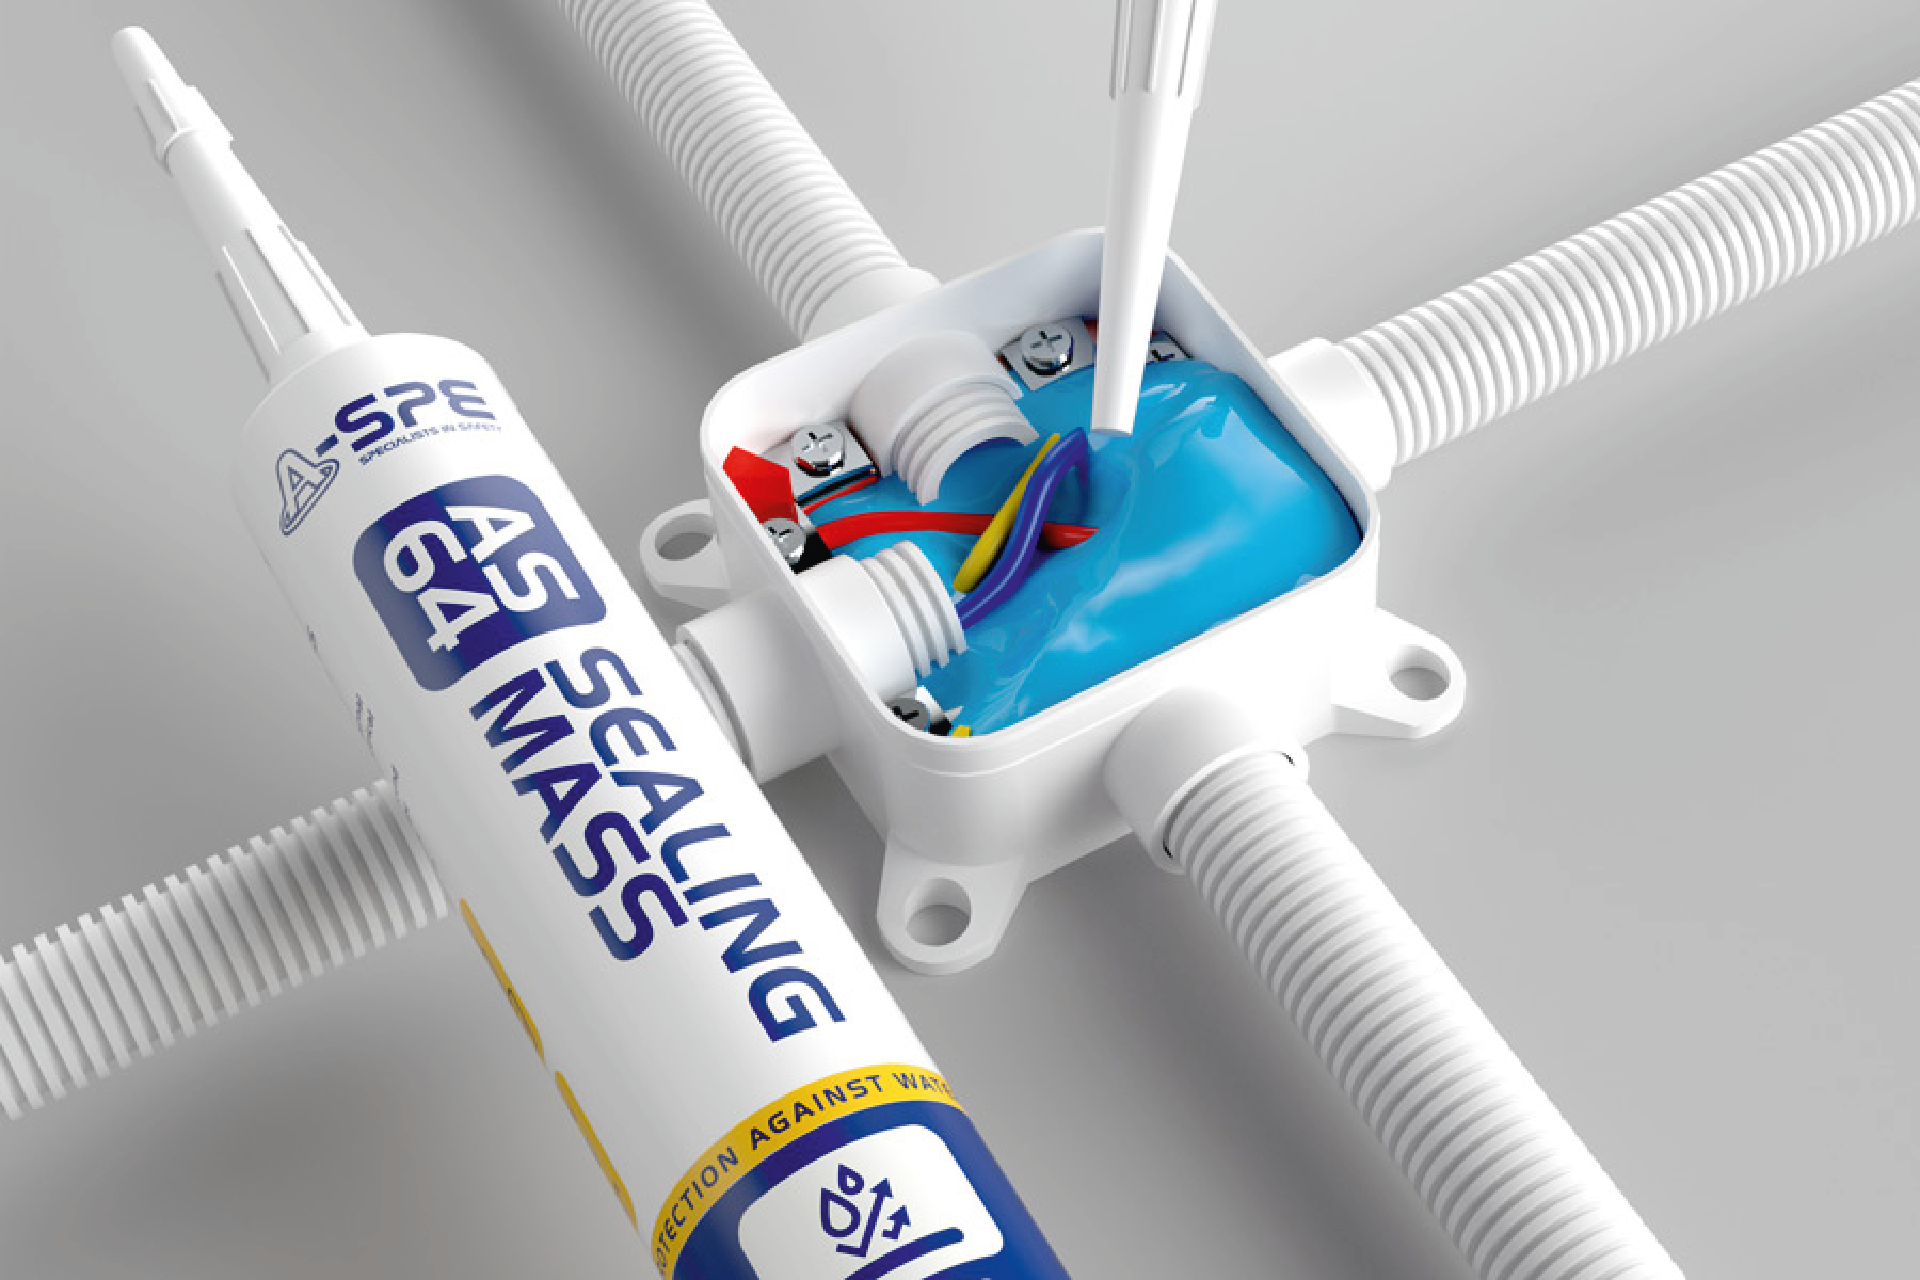 electric installation in white pvc pipe with sealing mass